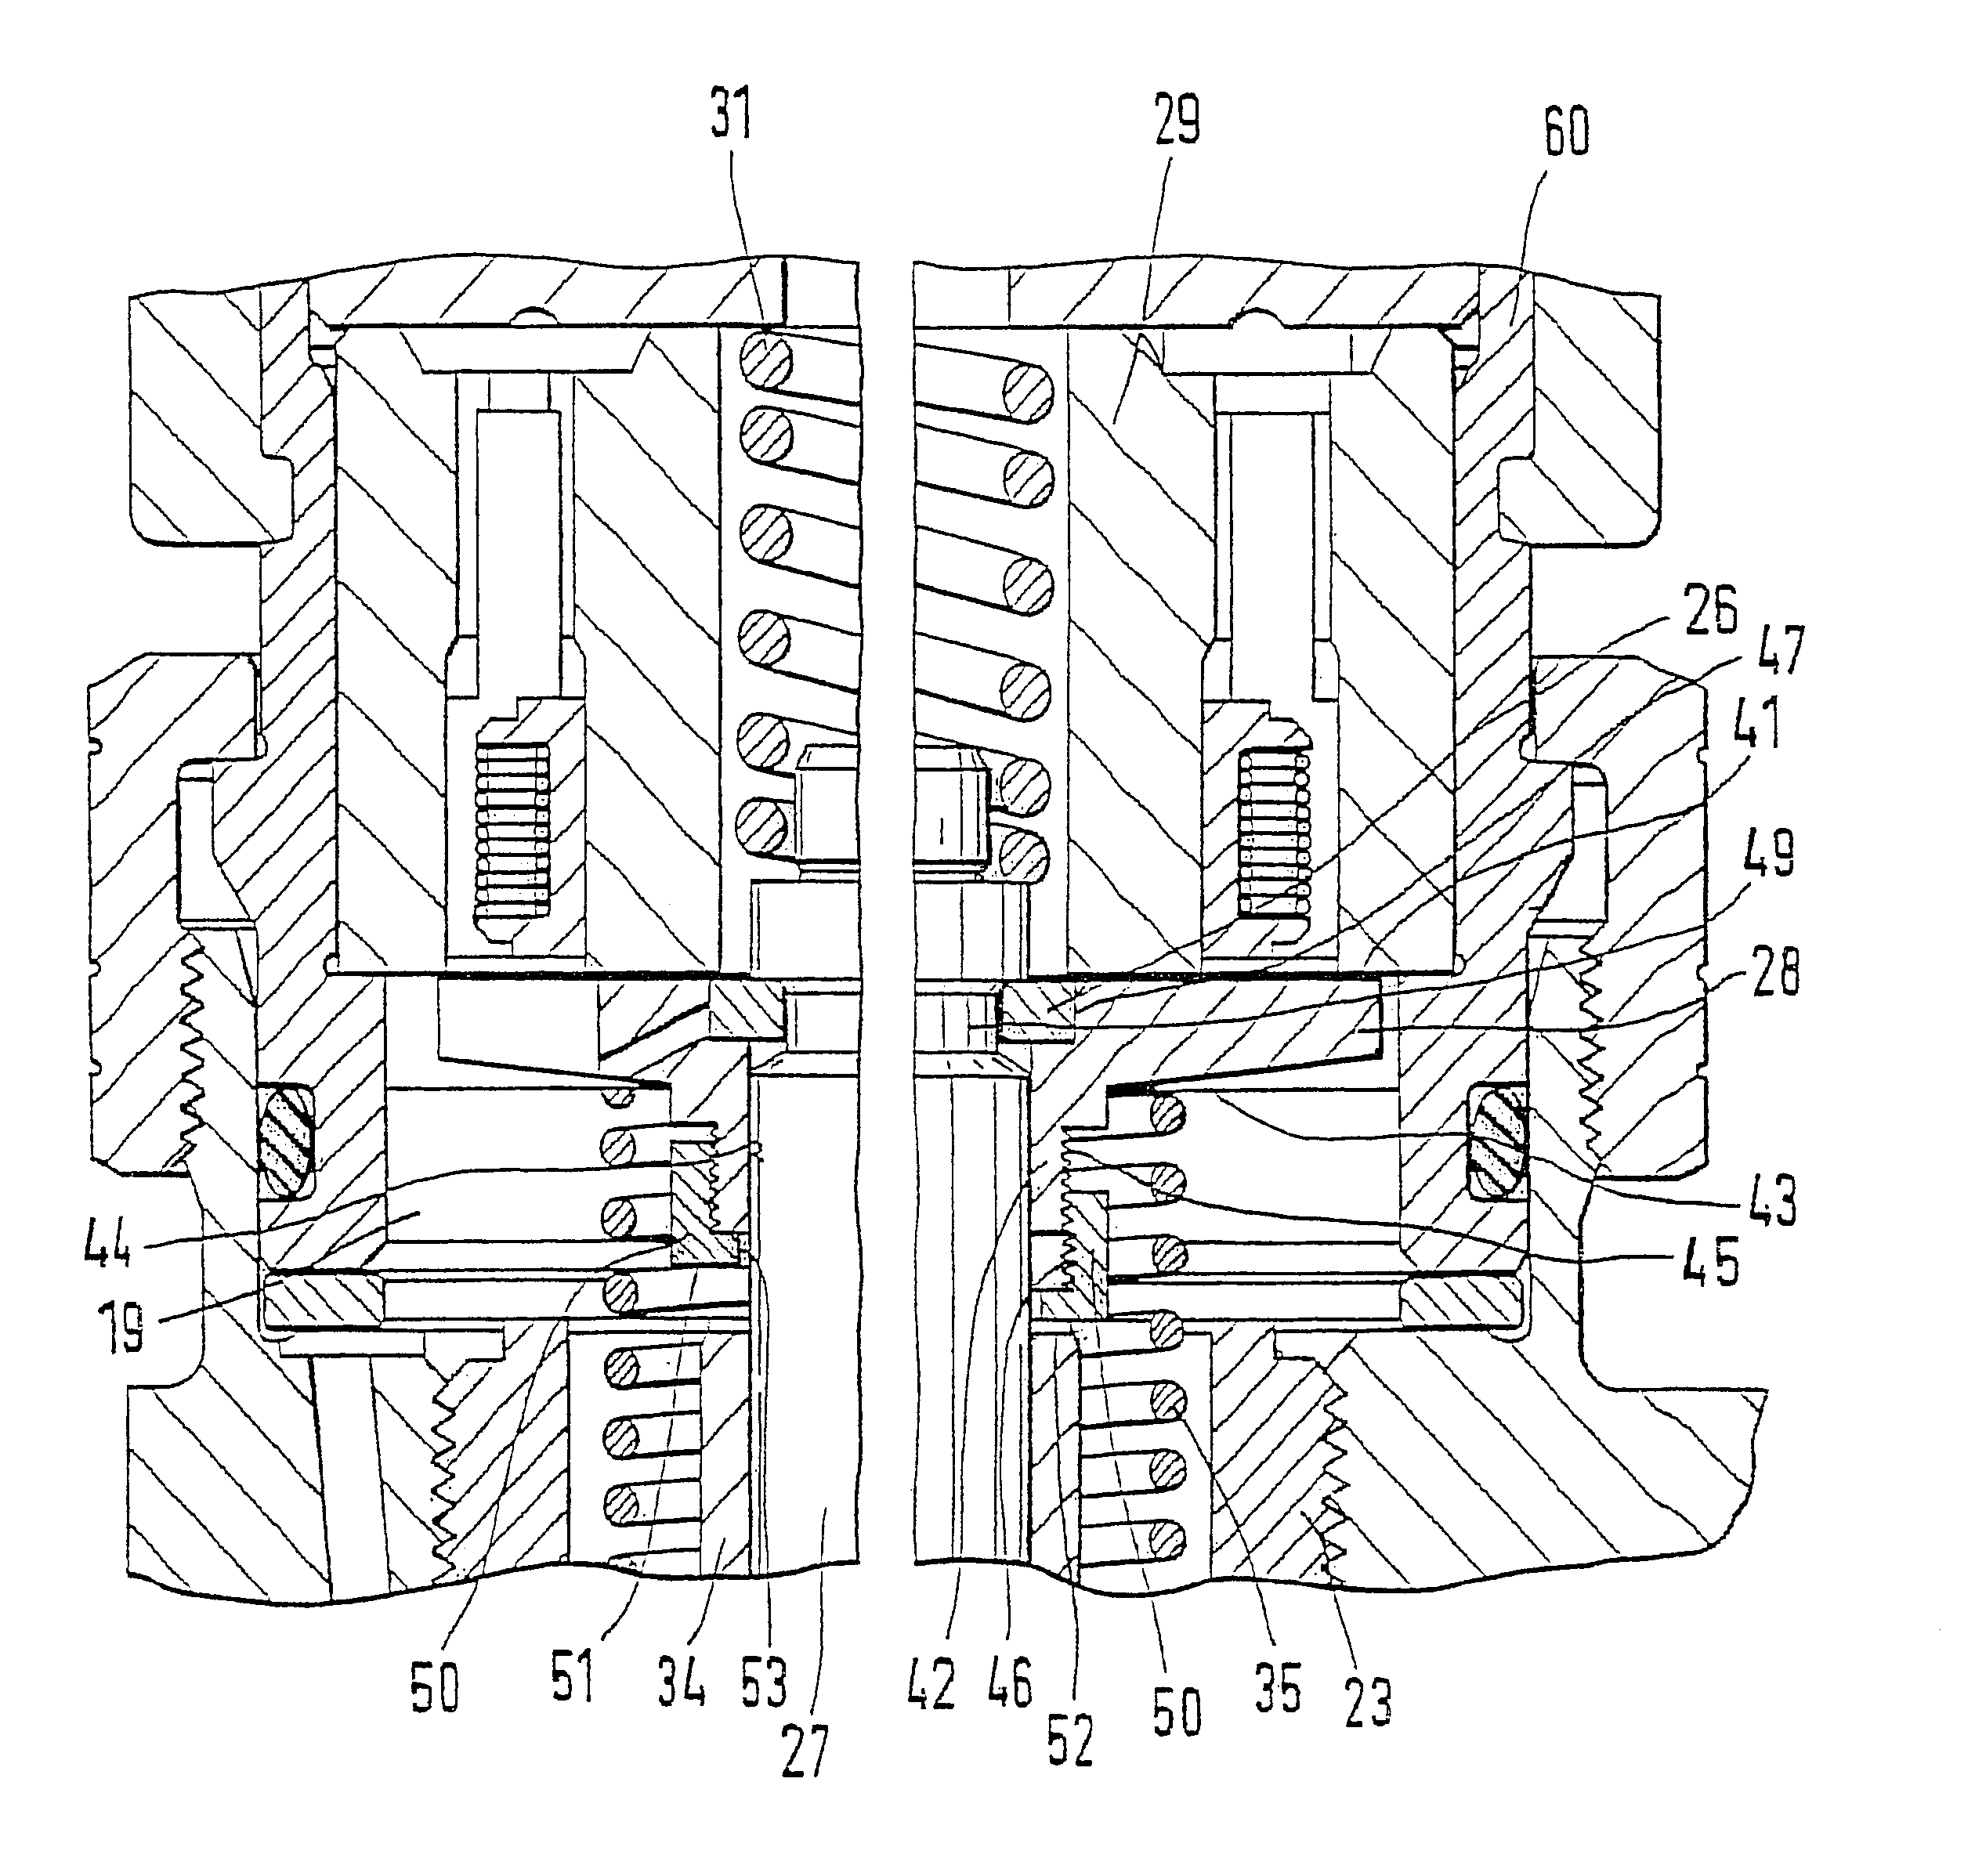 Solenoid valve for controlling a fuel injector of an internal combustion engine